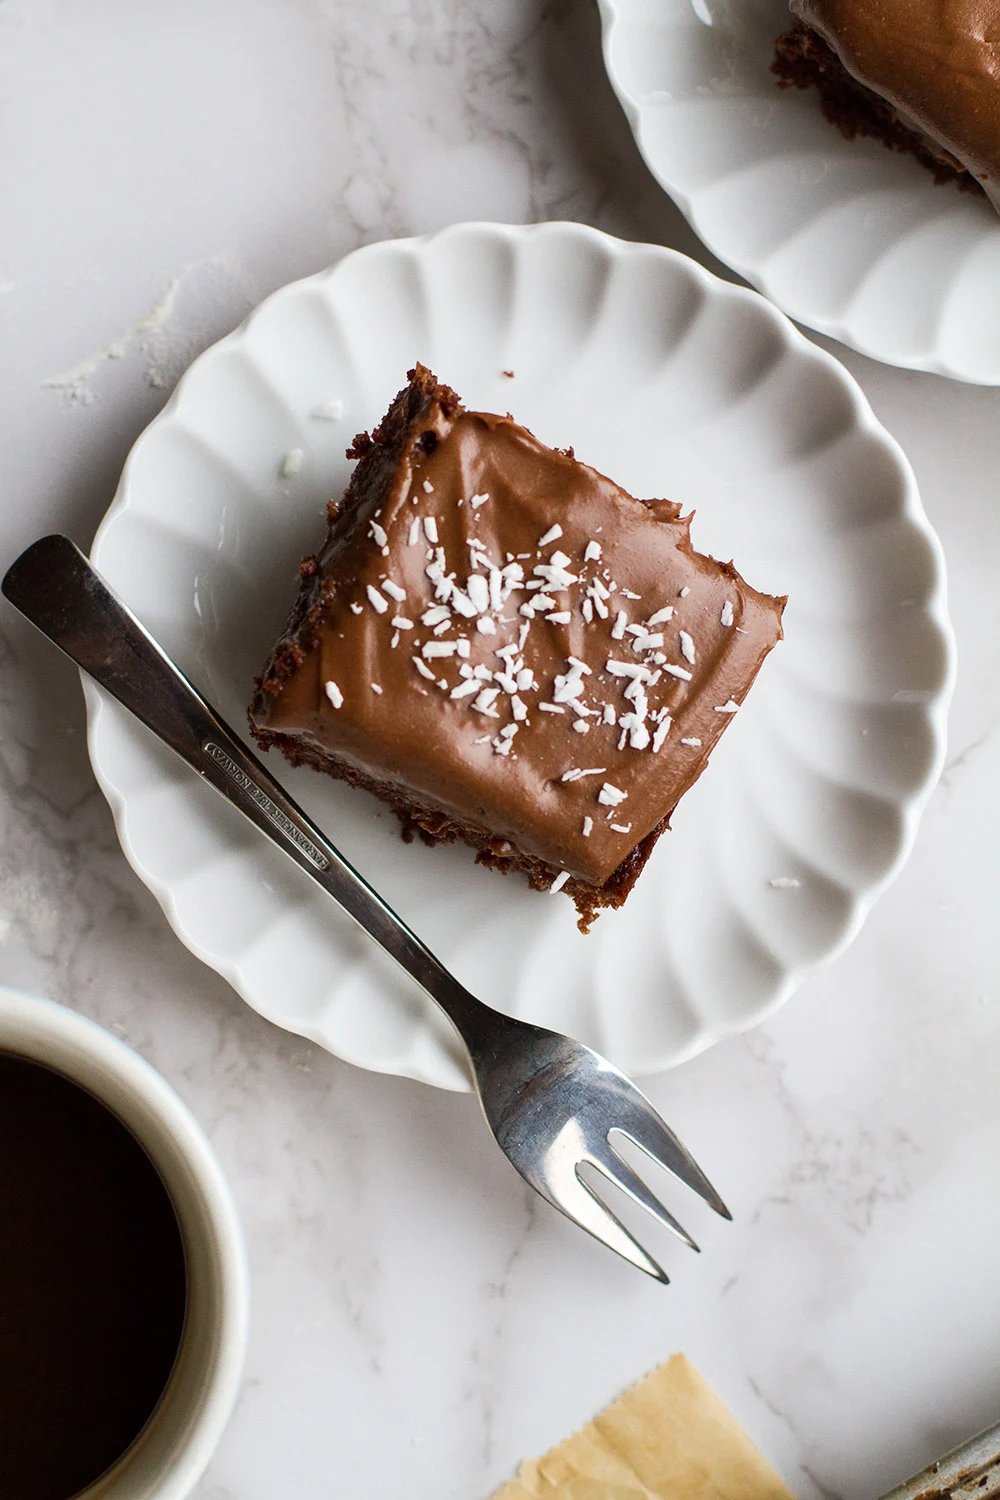 Slice of chocolate cake with shredded coconut as topping.